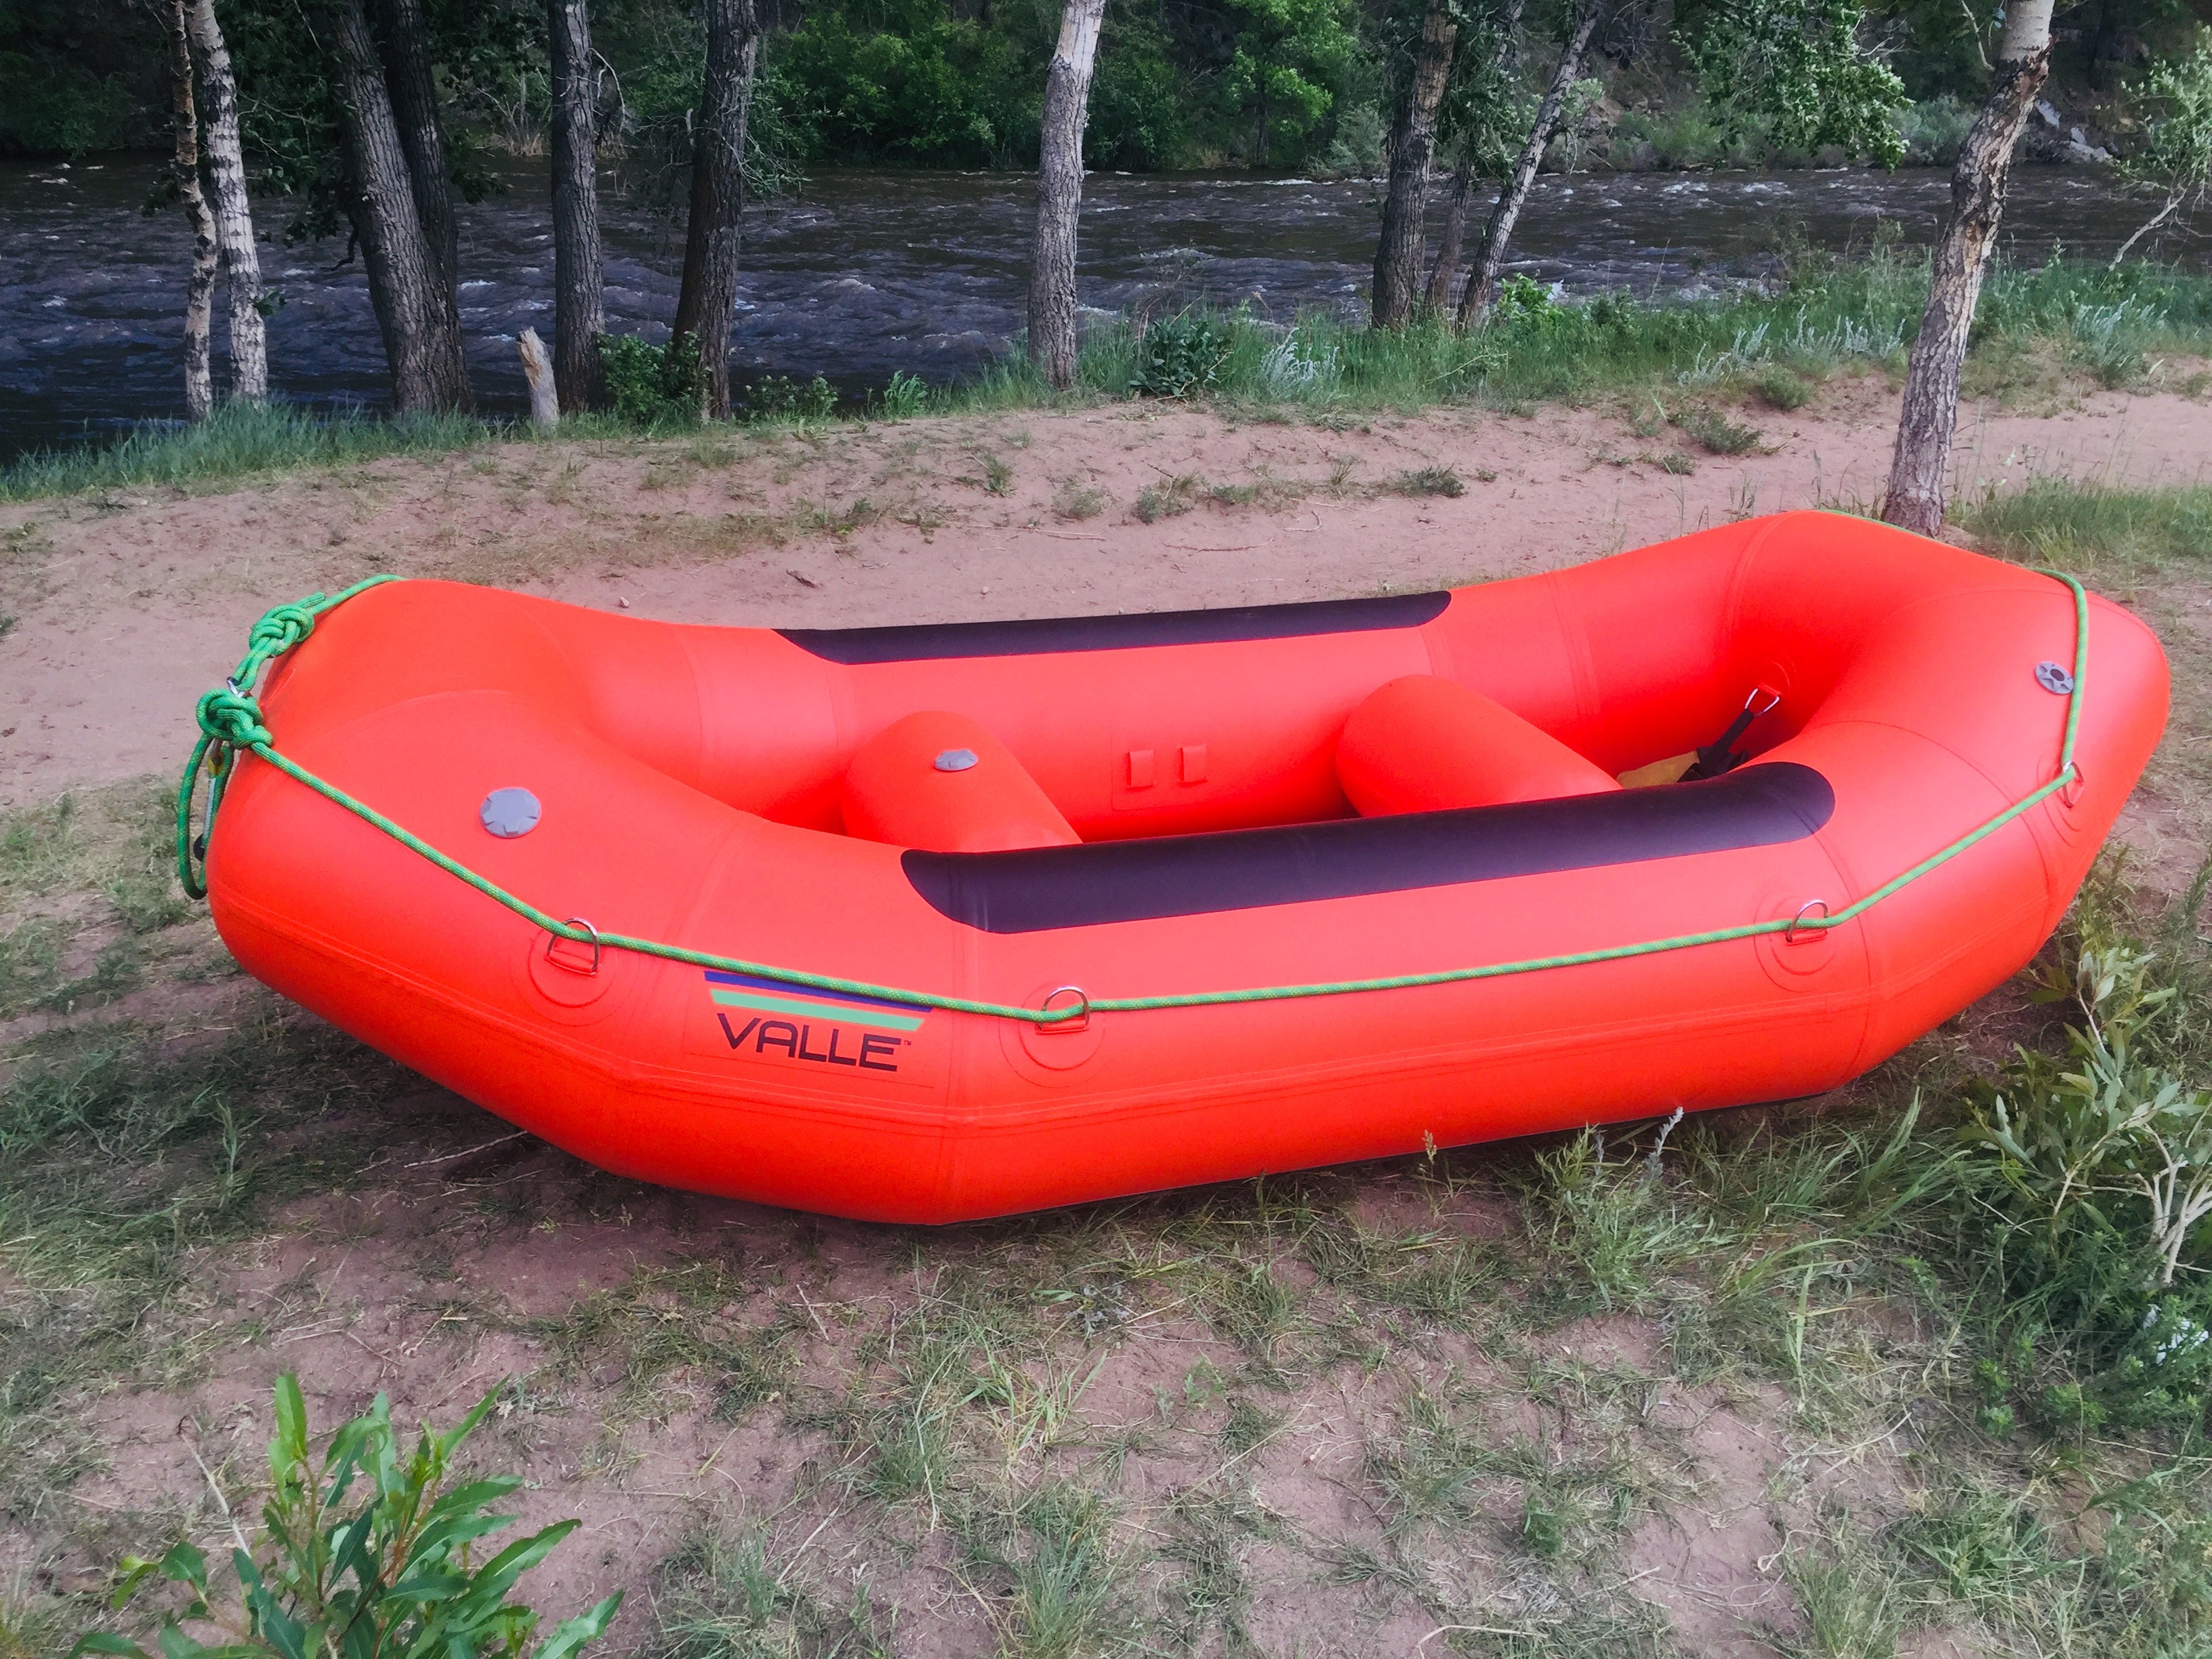 9.5 Foot Whitewater Raft - "The Taquito"